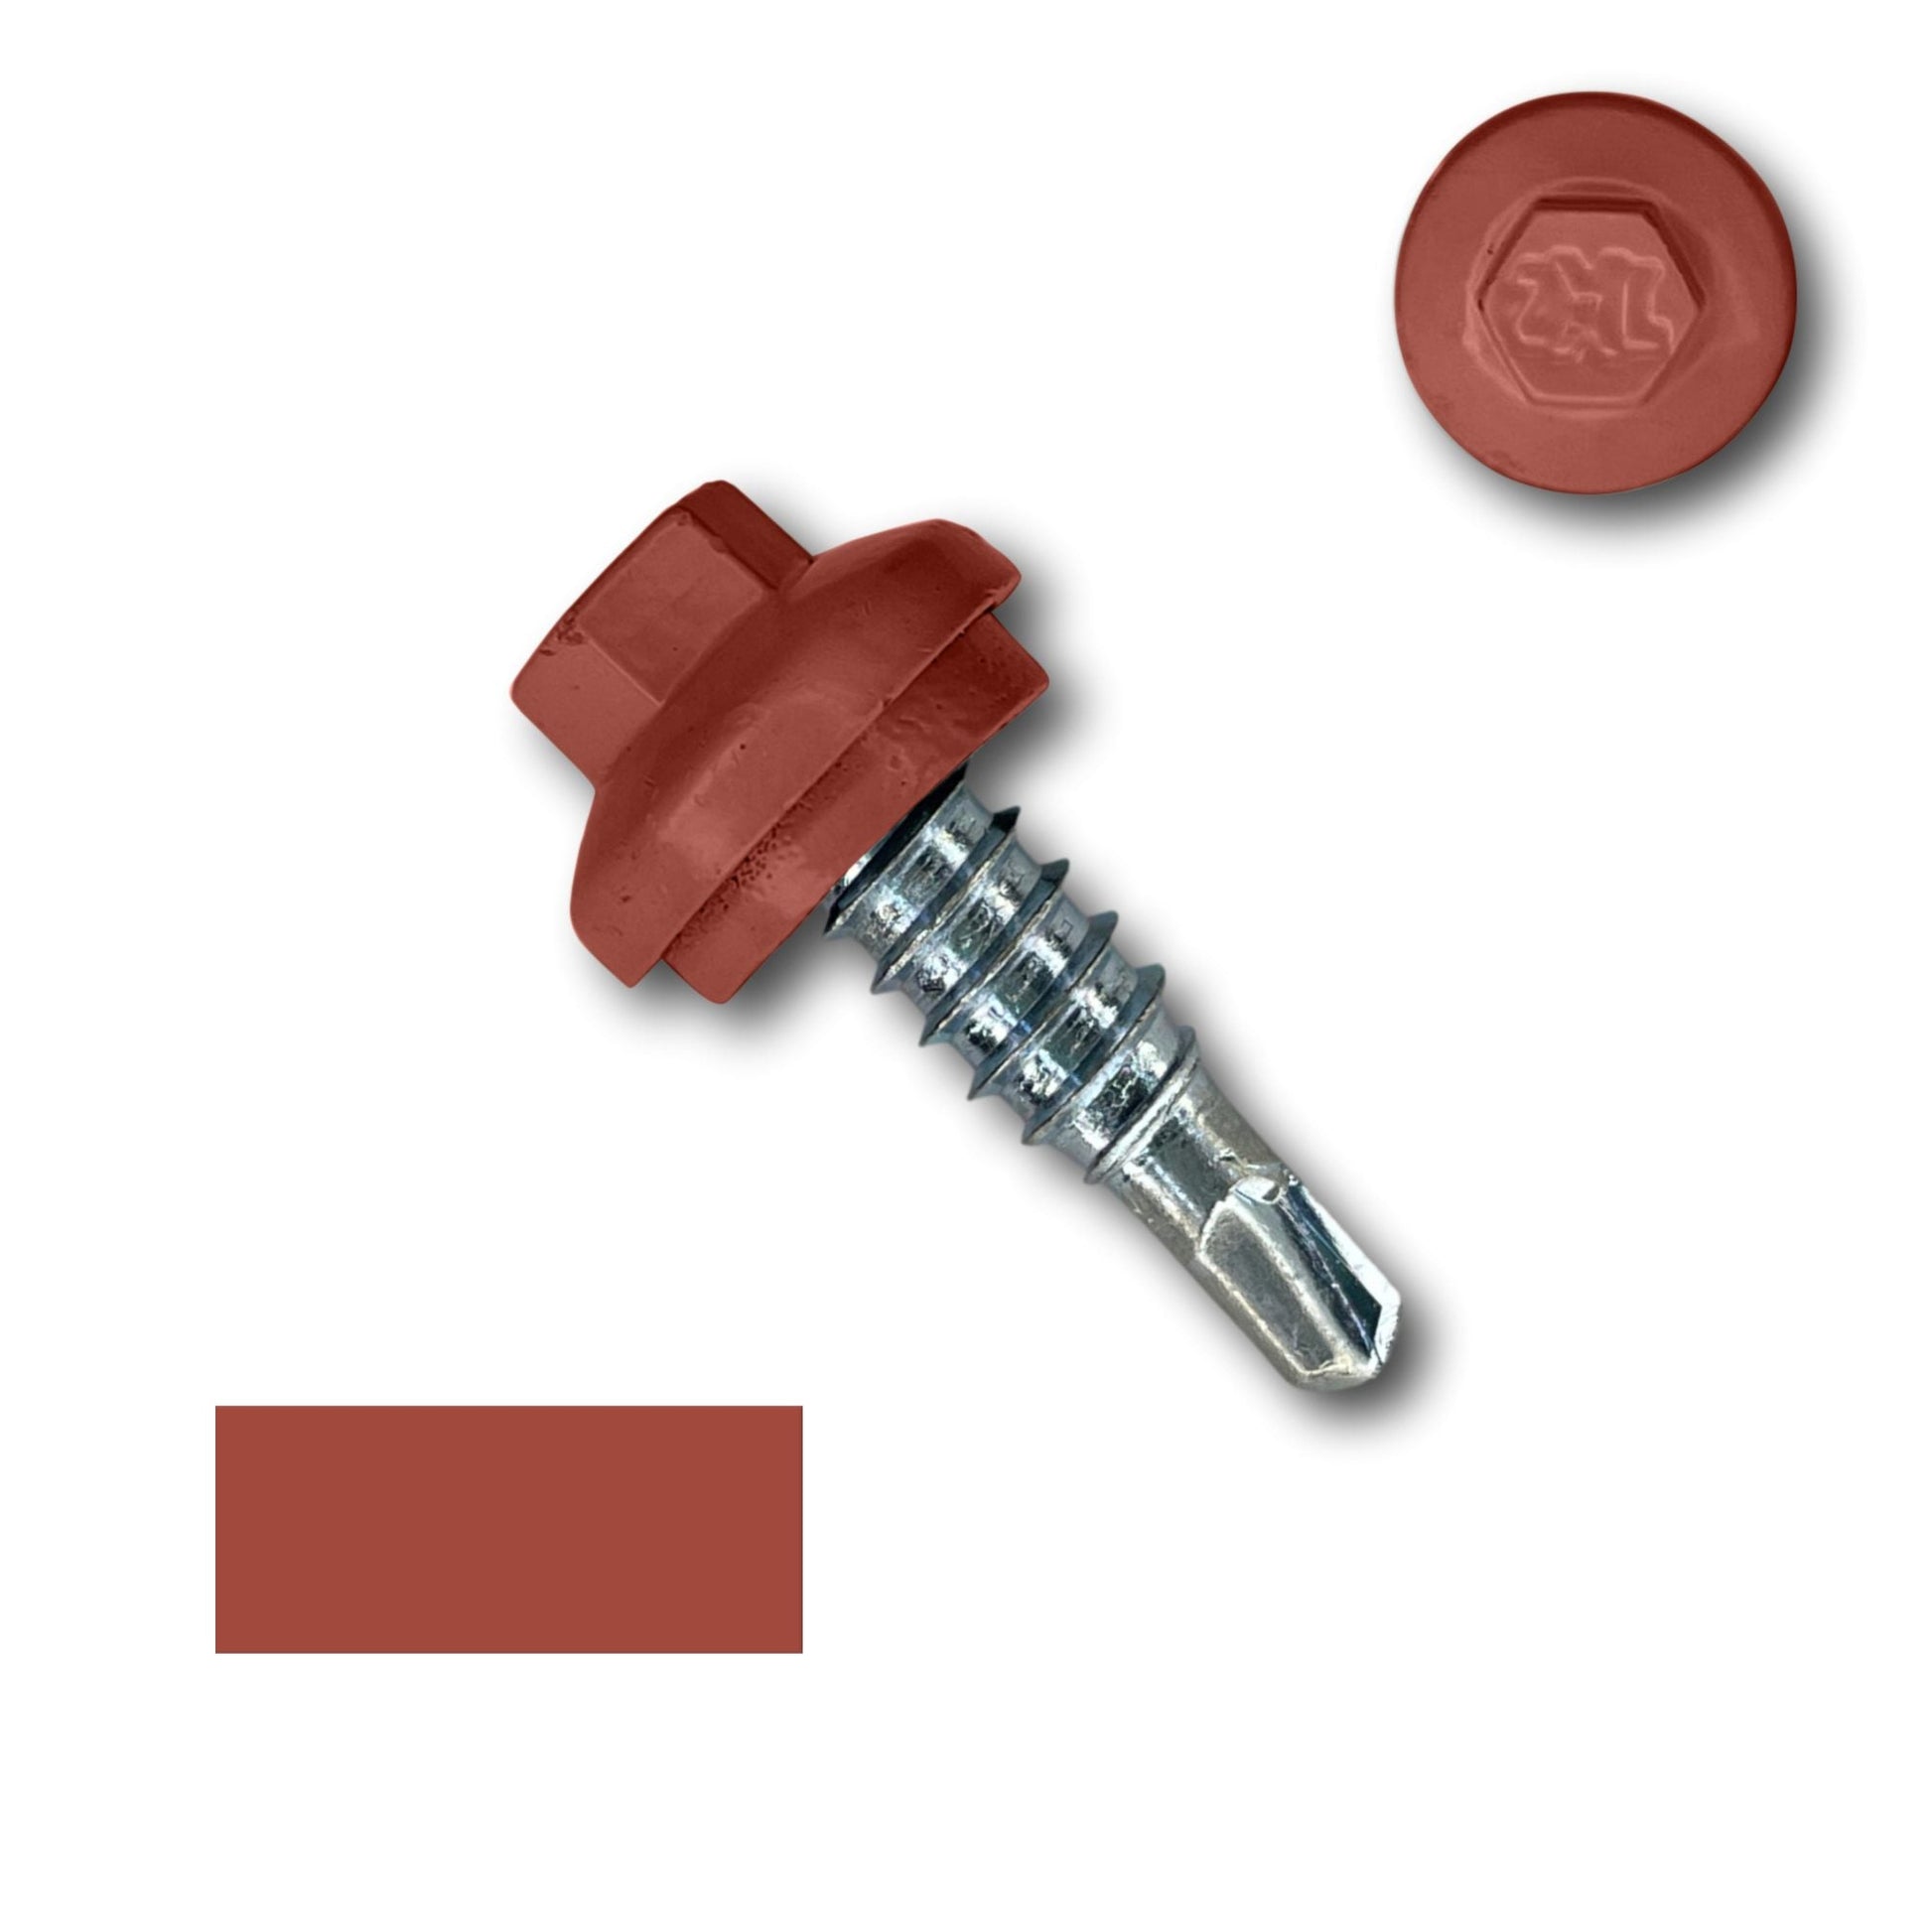 A close-up image of a red Perma Cover #14 x 7/8" Stitch Lap ZXL Dome Cap Metal Building Screws, Self-Drilling - 250 Pack with a matching red rubber washer and hex head cover. The screw has a metallic thread and a pointed tip at the end, ensuring secure fastening. A sample of the red color is displayed in a rectangular swatch below the screw.